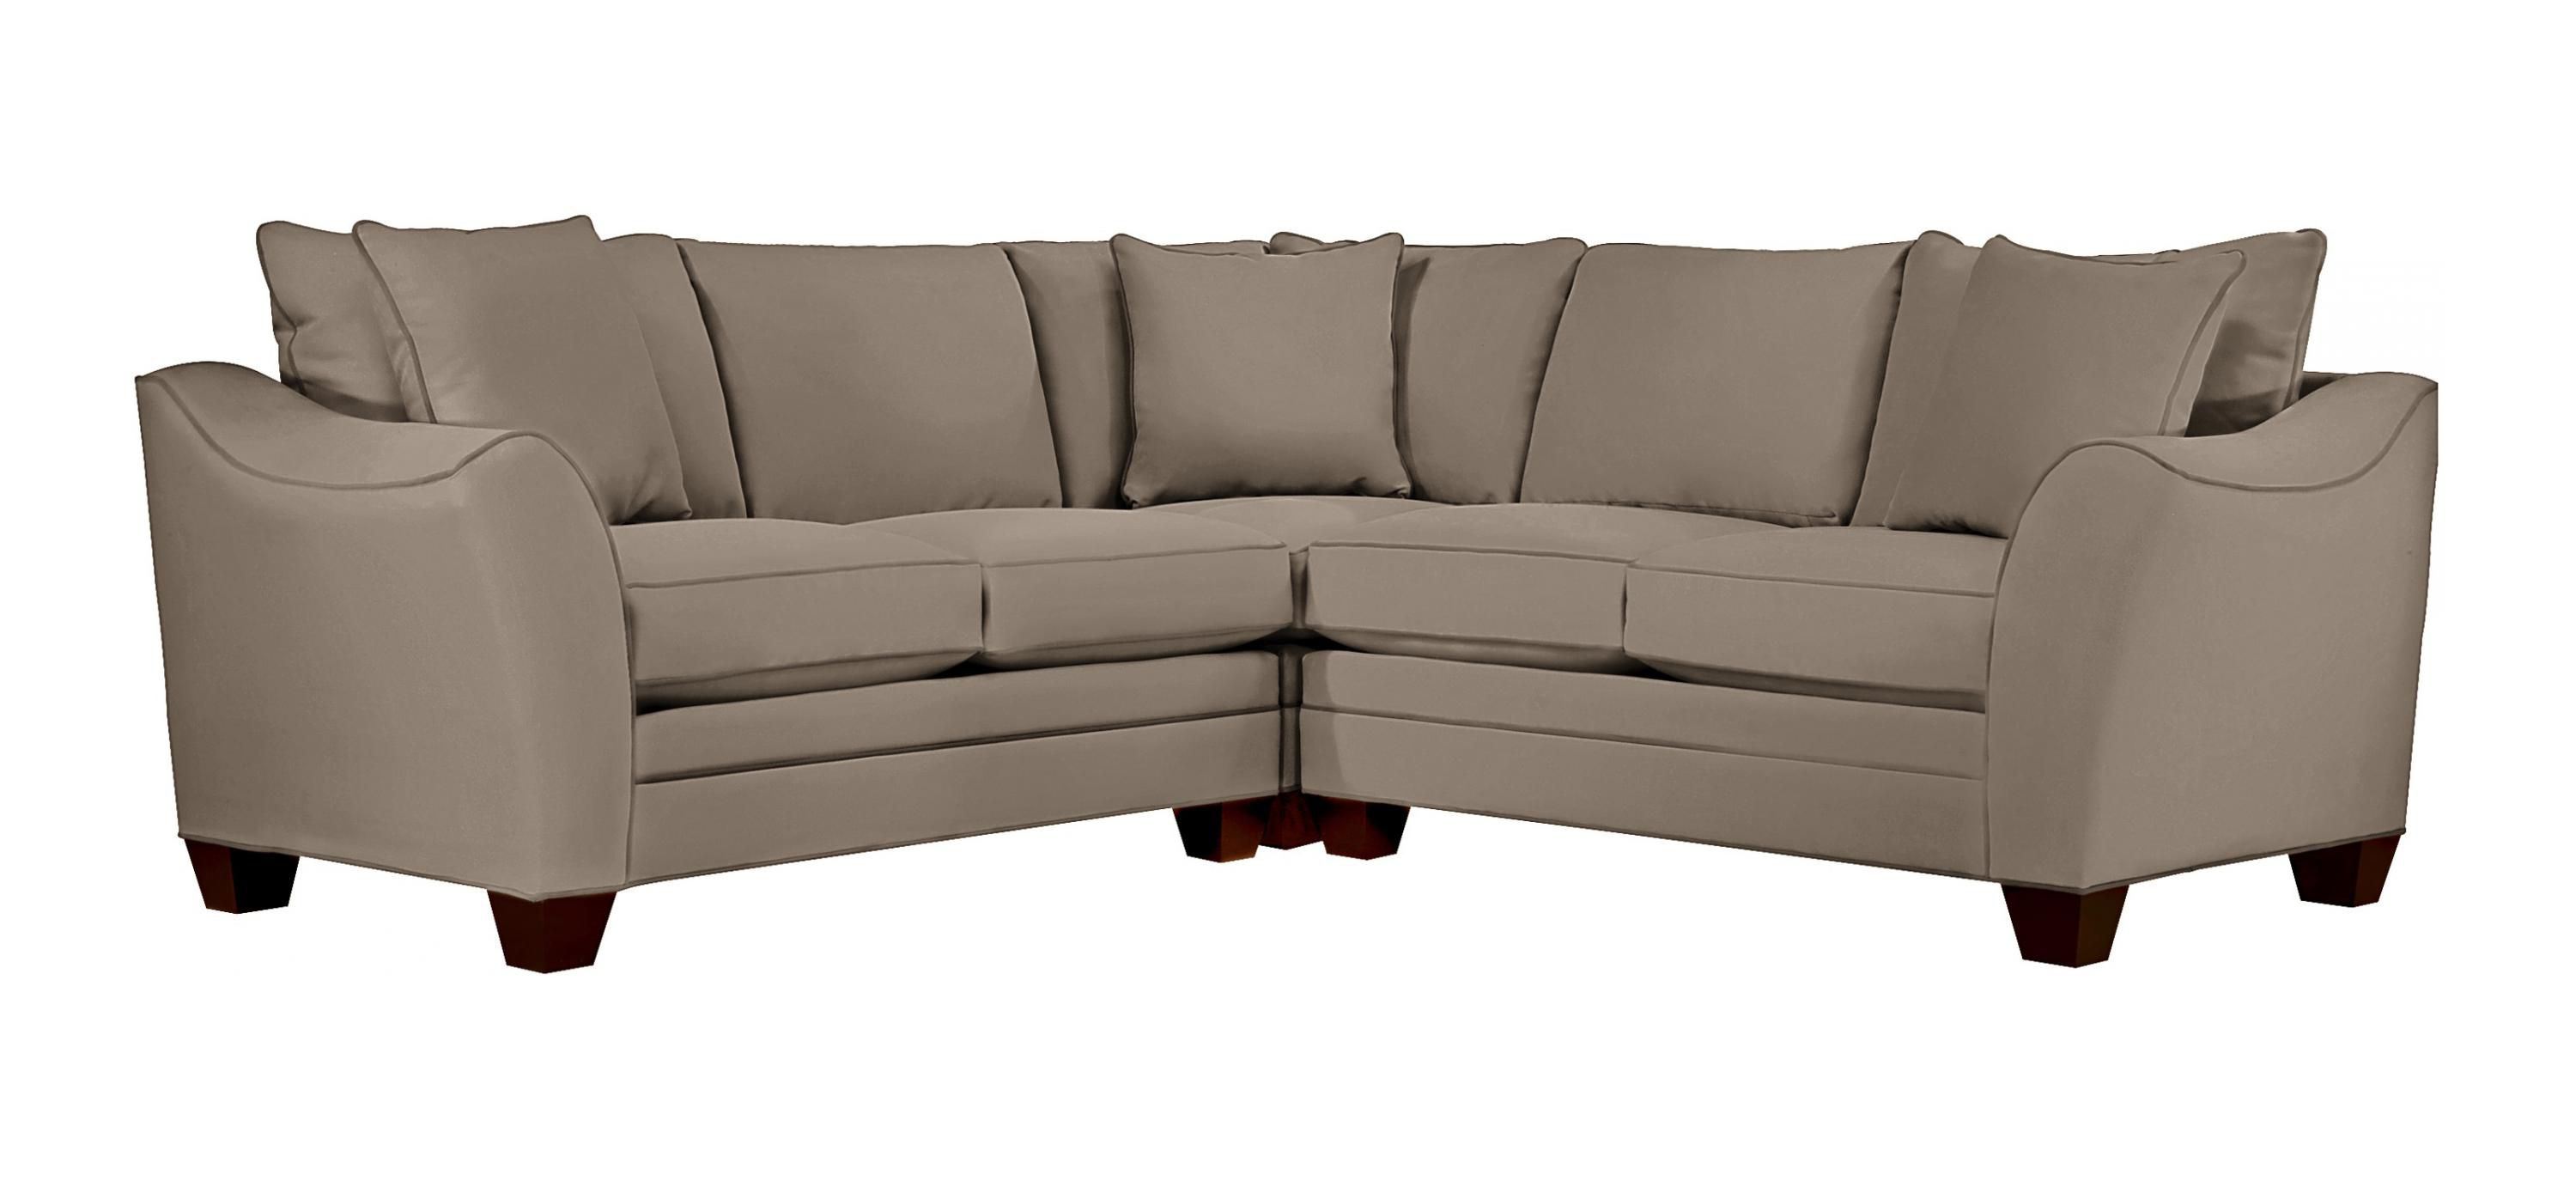 Foresthill 3-pc. Symmetrical Microfiber Sectional Sofa